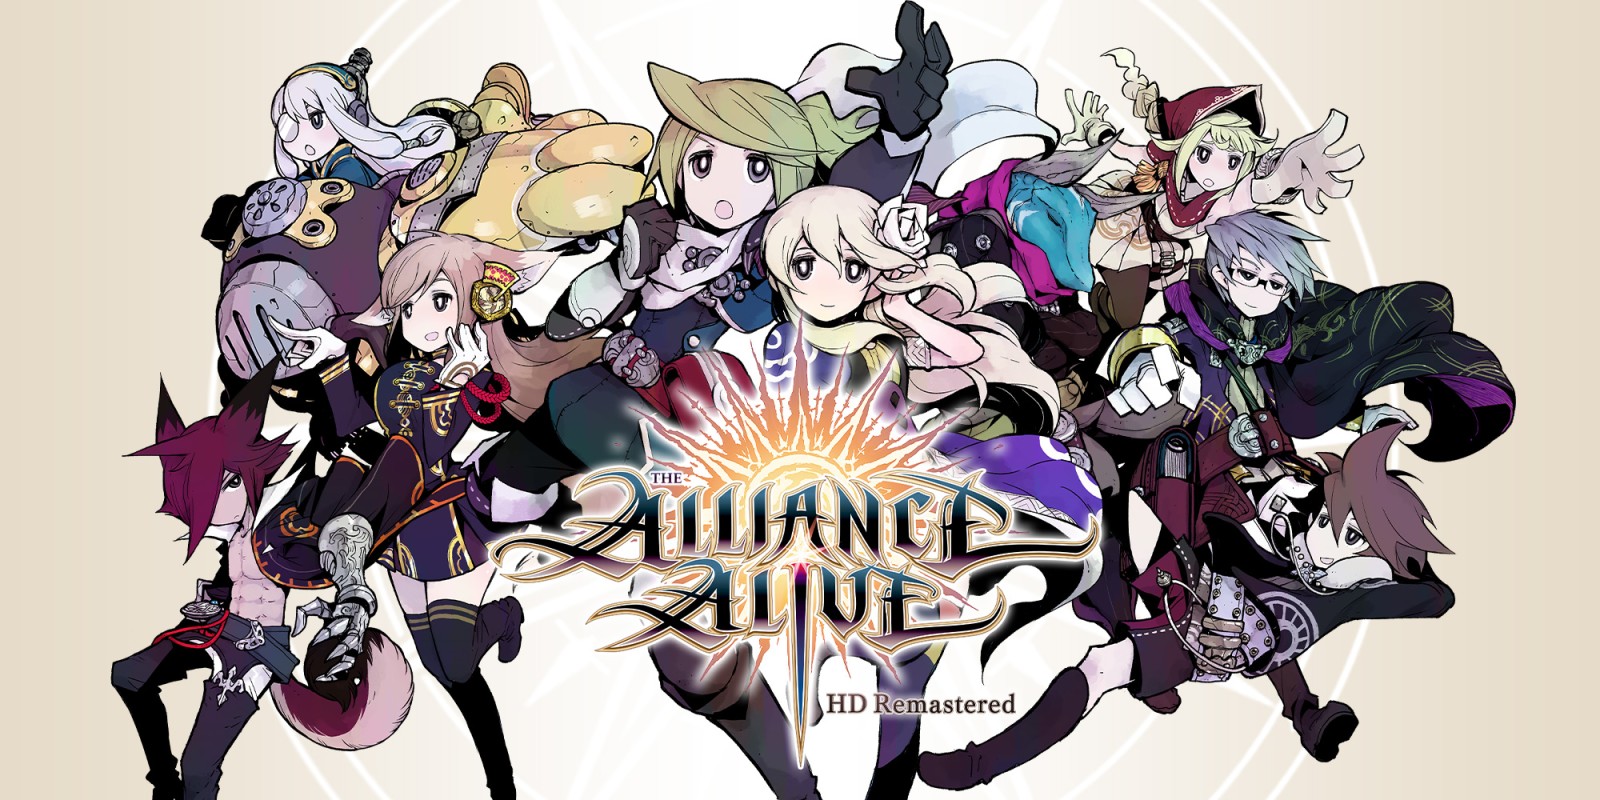 The Alliance Alive HD Remastered – more gameplay